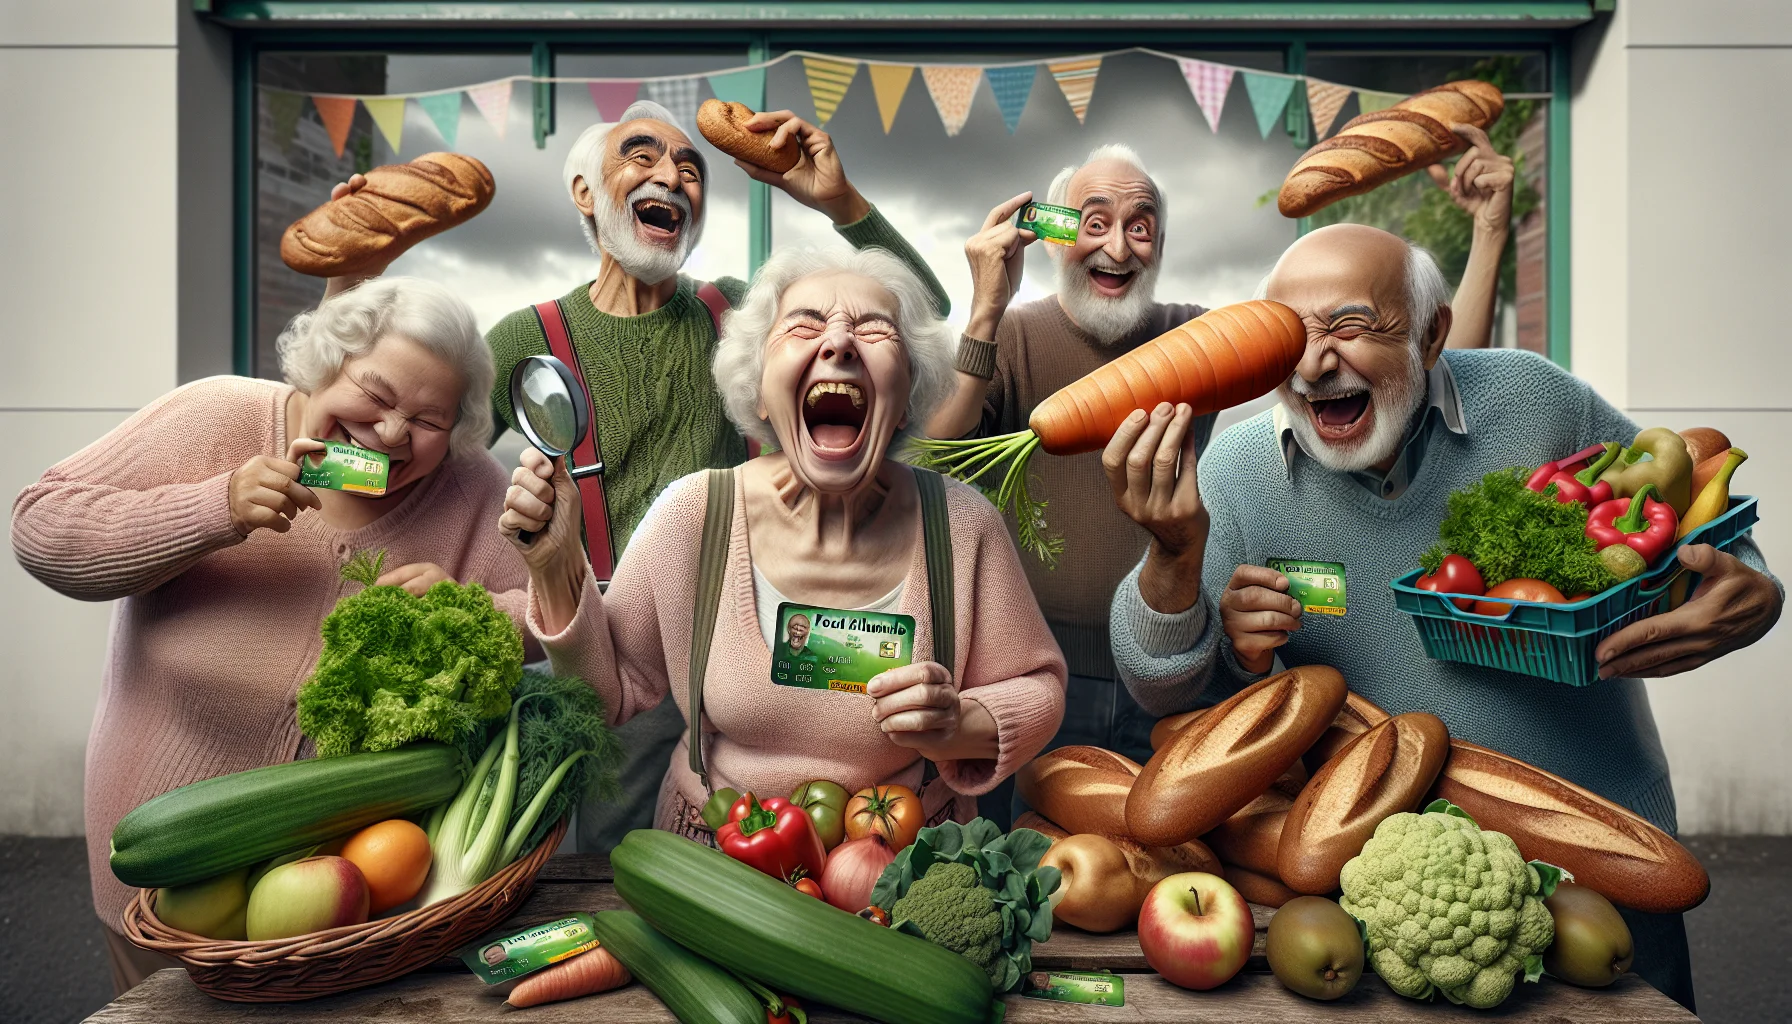 Render an amusing and realistic scene of an elderly group showing off their food allowance cards at a local farmers market. One elderly Caucasian woman laughing as she balances a stack of green, leafy vegetables in her arms. An old Hispanic man in the background chomping on an oversized carrot in jest, with his food card tucked behind his ear. A South Asian elderly lady carefully scrutinizing a fruit with a magnifying glass, while her food allowance card is bookmarking a thick health recipe book she's holding. An elderly Middle-Eastern man holding his card up like a trophy while sitting on a pile of wholegrain bread loaves, laughing and being cheered on by the other seniors. The scene is full of joy, humor, and a focus on eating healthily.